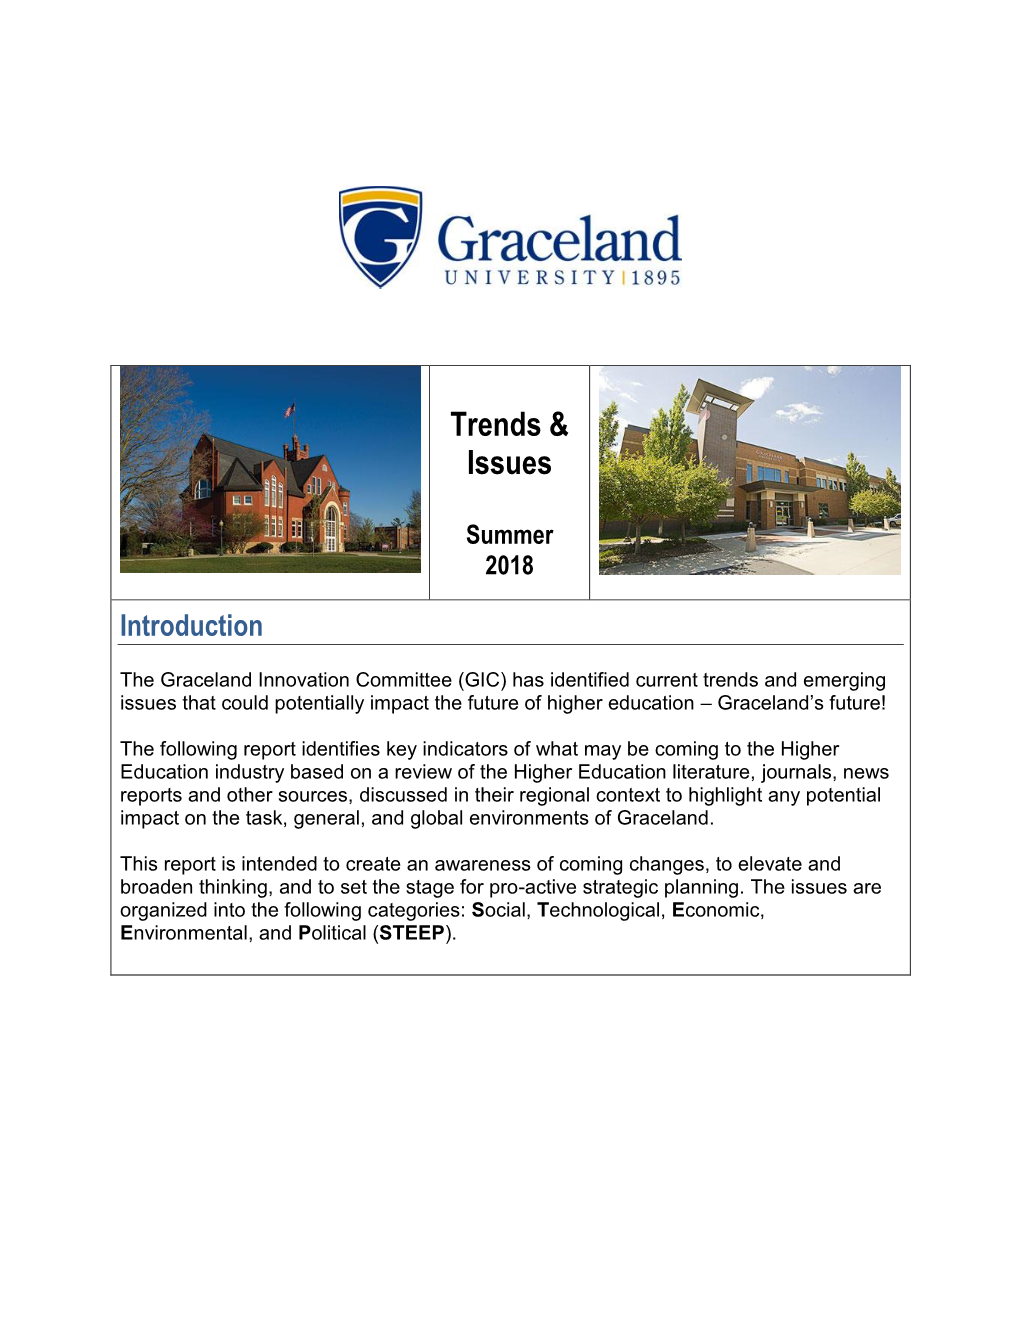 Environmental Scanning Report, Which Identifies Current Trends and Emerging Issues That Have the Potential to Affect the Future of Graceland University